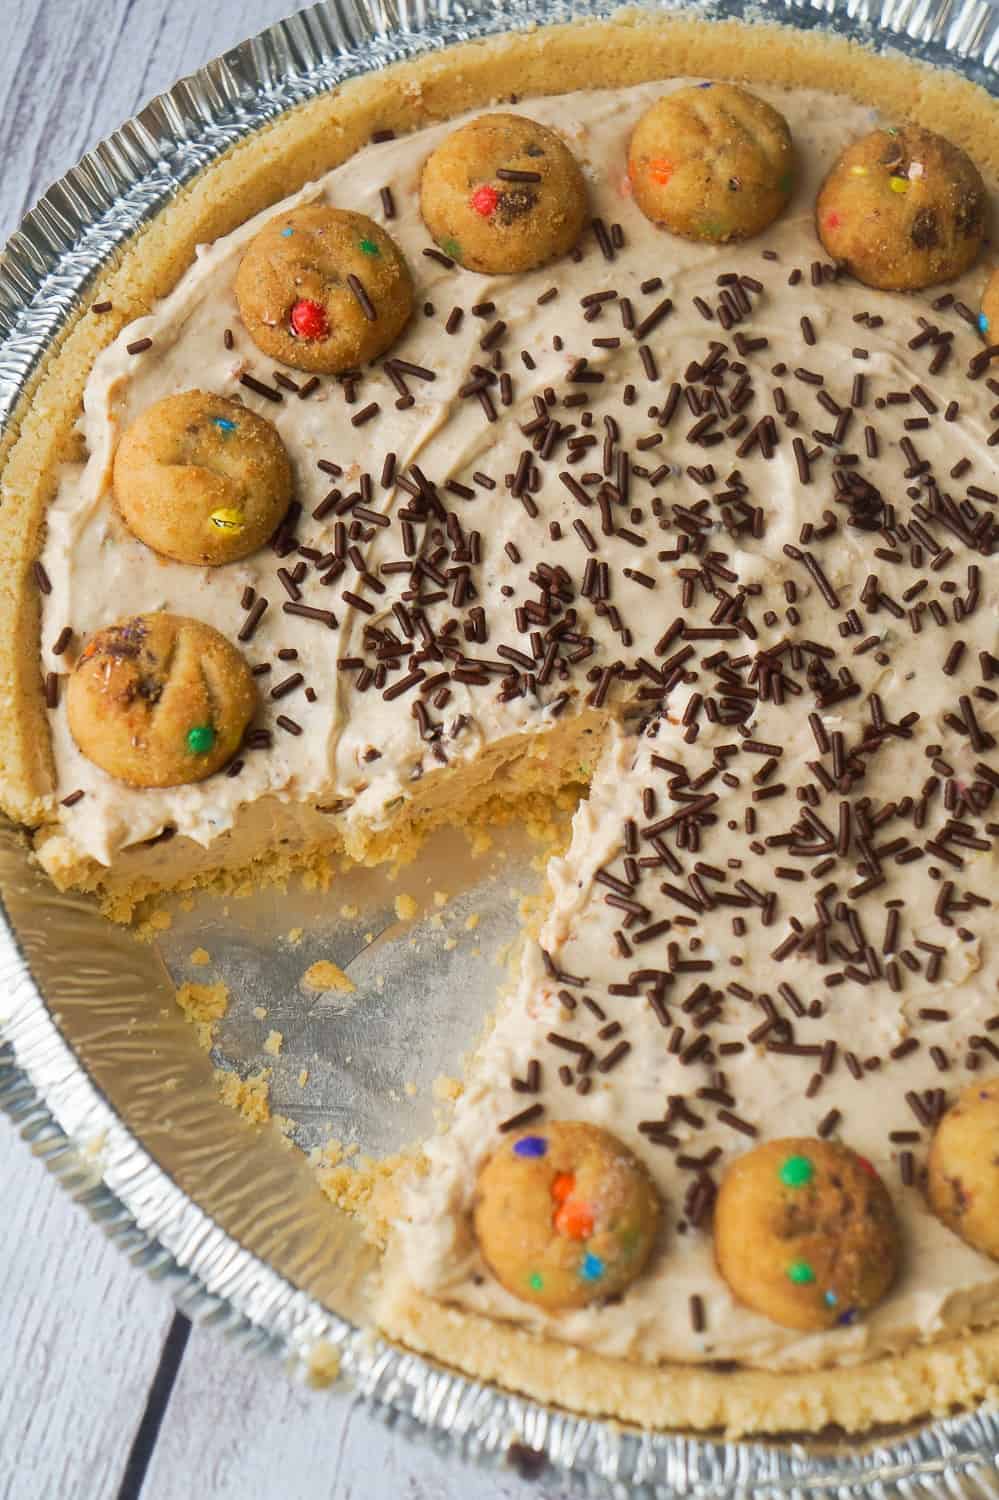 Rainbow Chip Cookie No Bake Cheesecake is an easy no bake pie recipe perfect for spring and summer. This tasty dessert is made in a shortbread pie crust and loaded with crushed Rainbow Chips Ahoy Cookies.